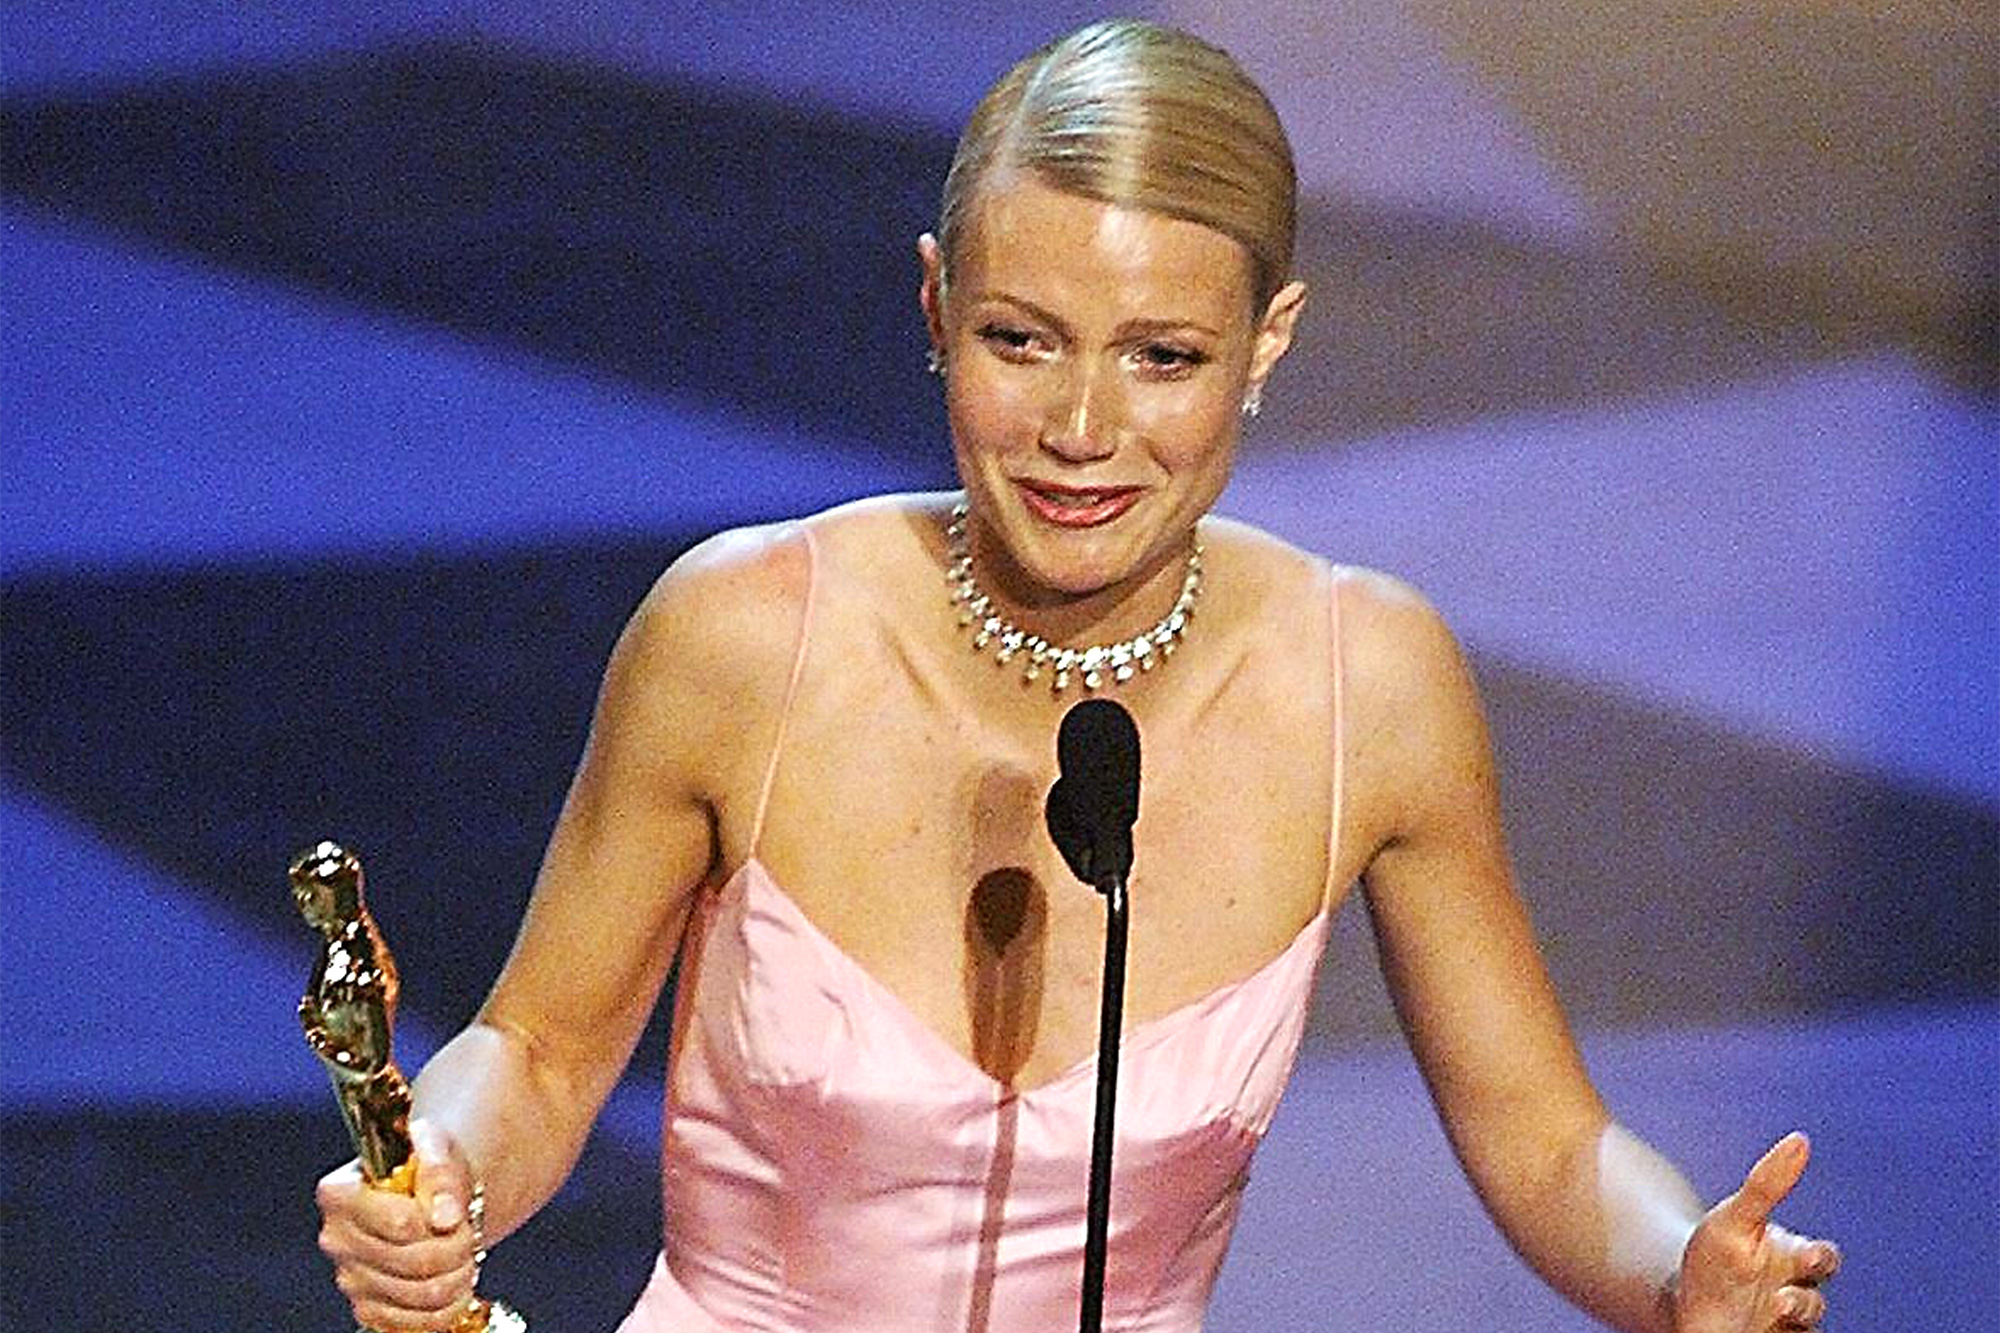 Gwyenth Paltrow holds her Oscar after winning for Best Performance by an Actress in a Leading Role for her part in the movie "Shakespeare in Love" during the 71st Academy Awards 21 March 1999 at the Dorothy Chandler Pavilion.